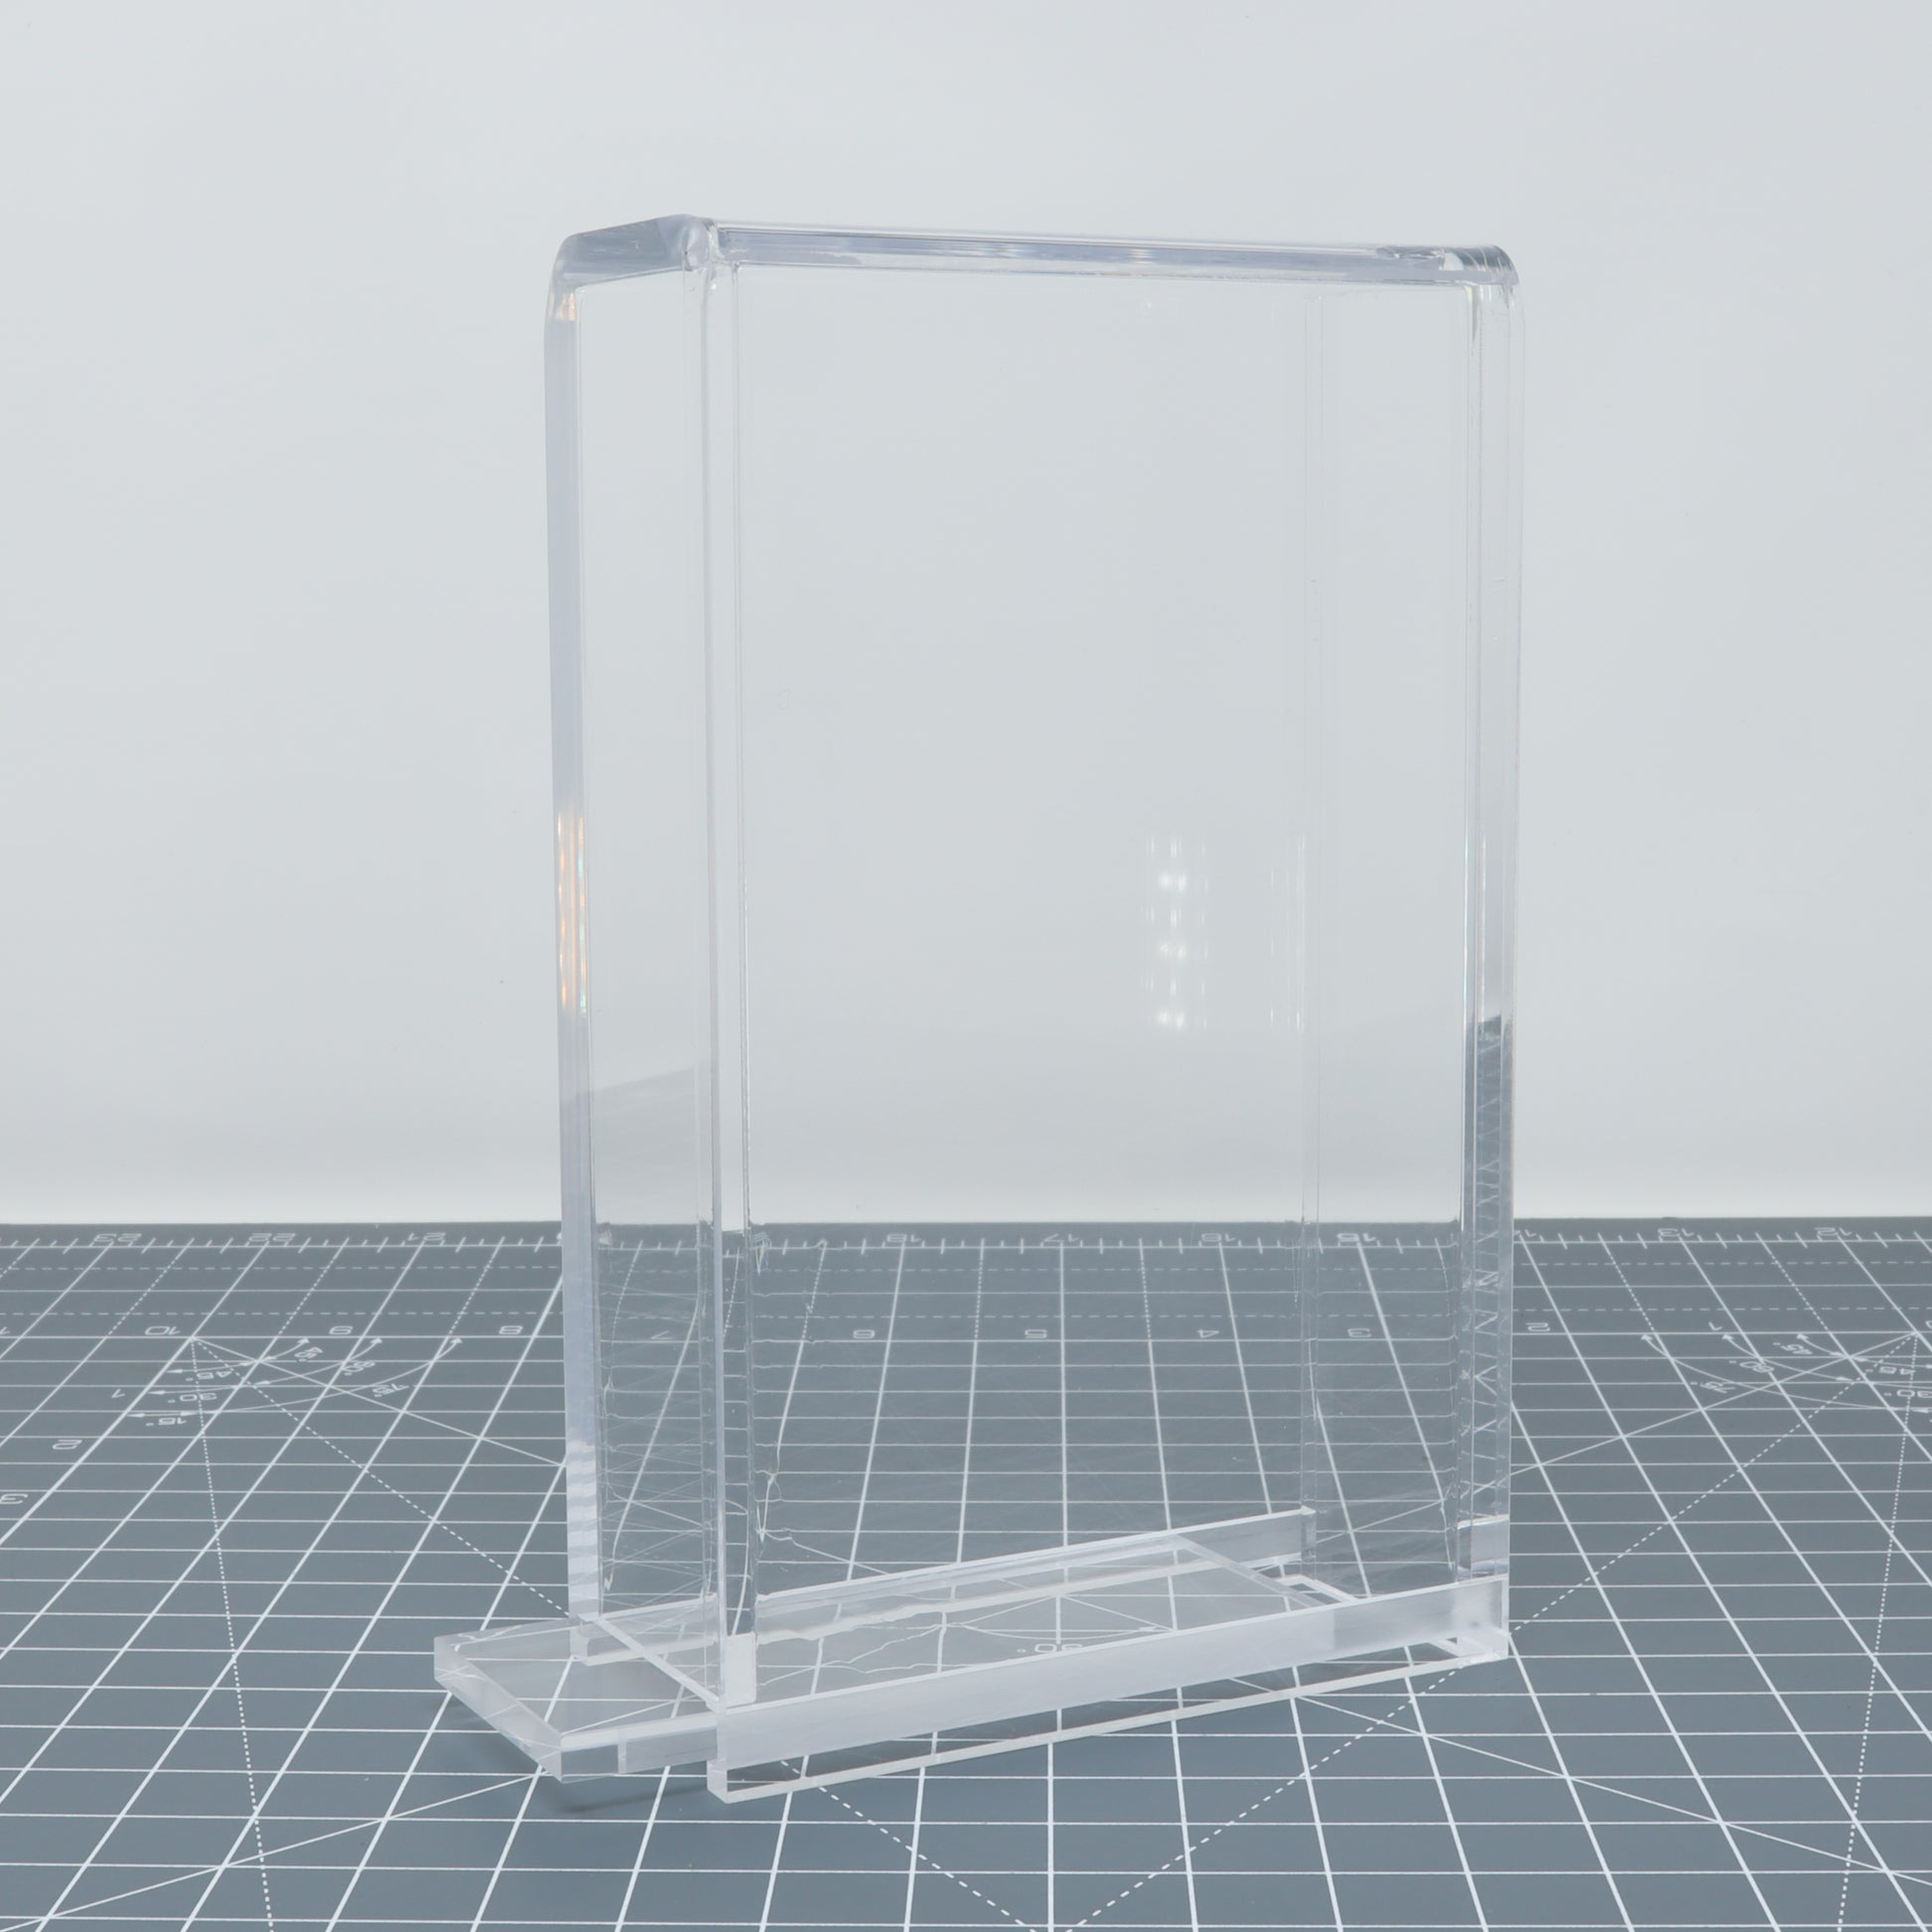 Transparent acrylic display case for Game Boy Color - Display Capsule accessories on a surface.